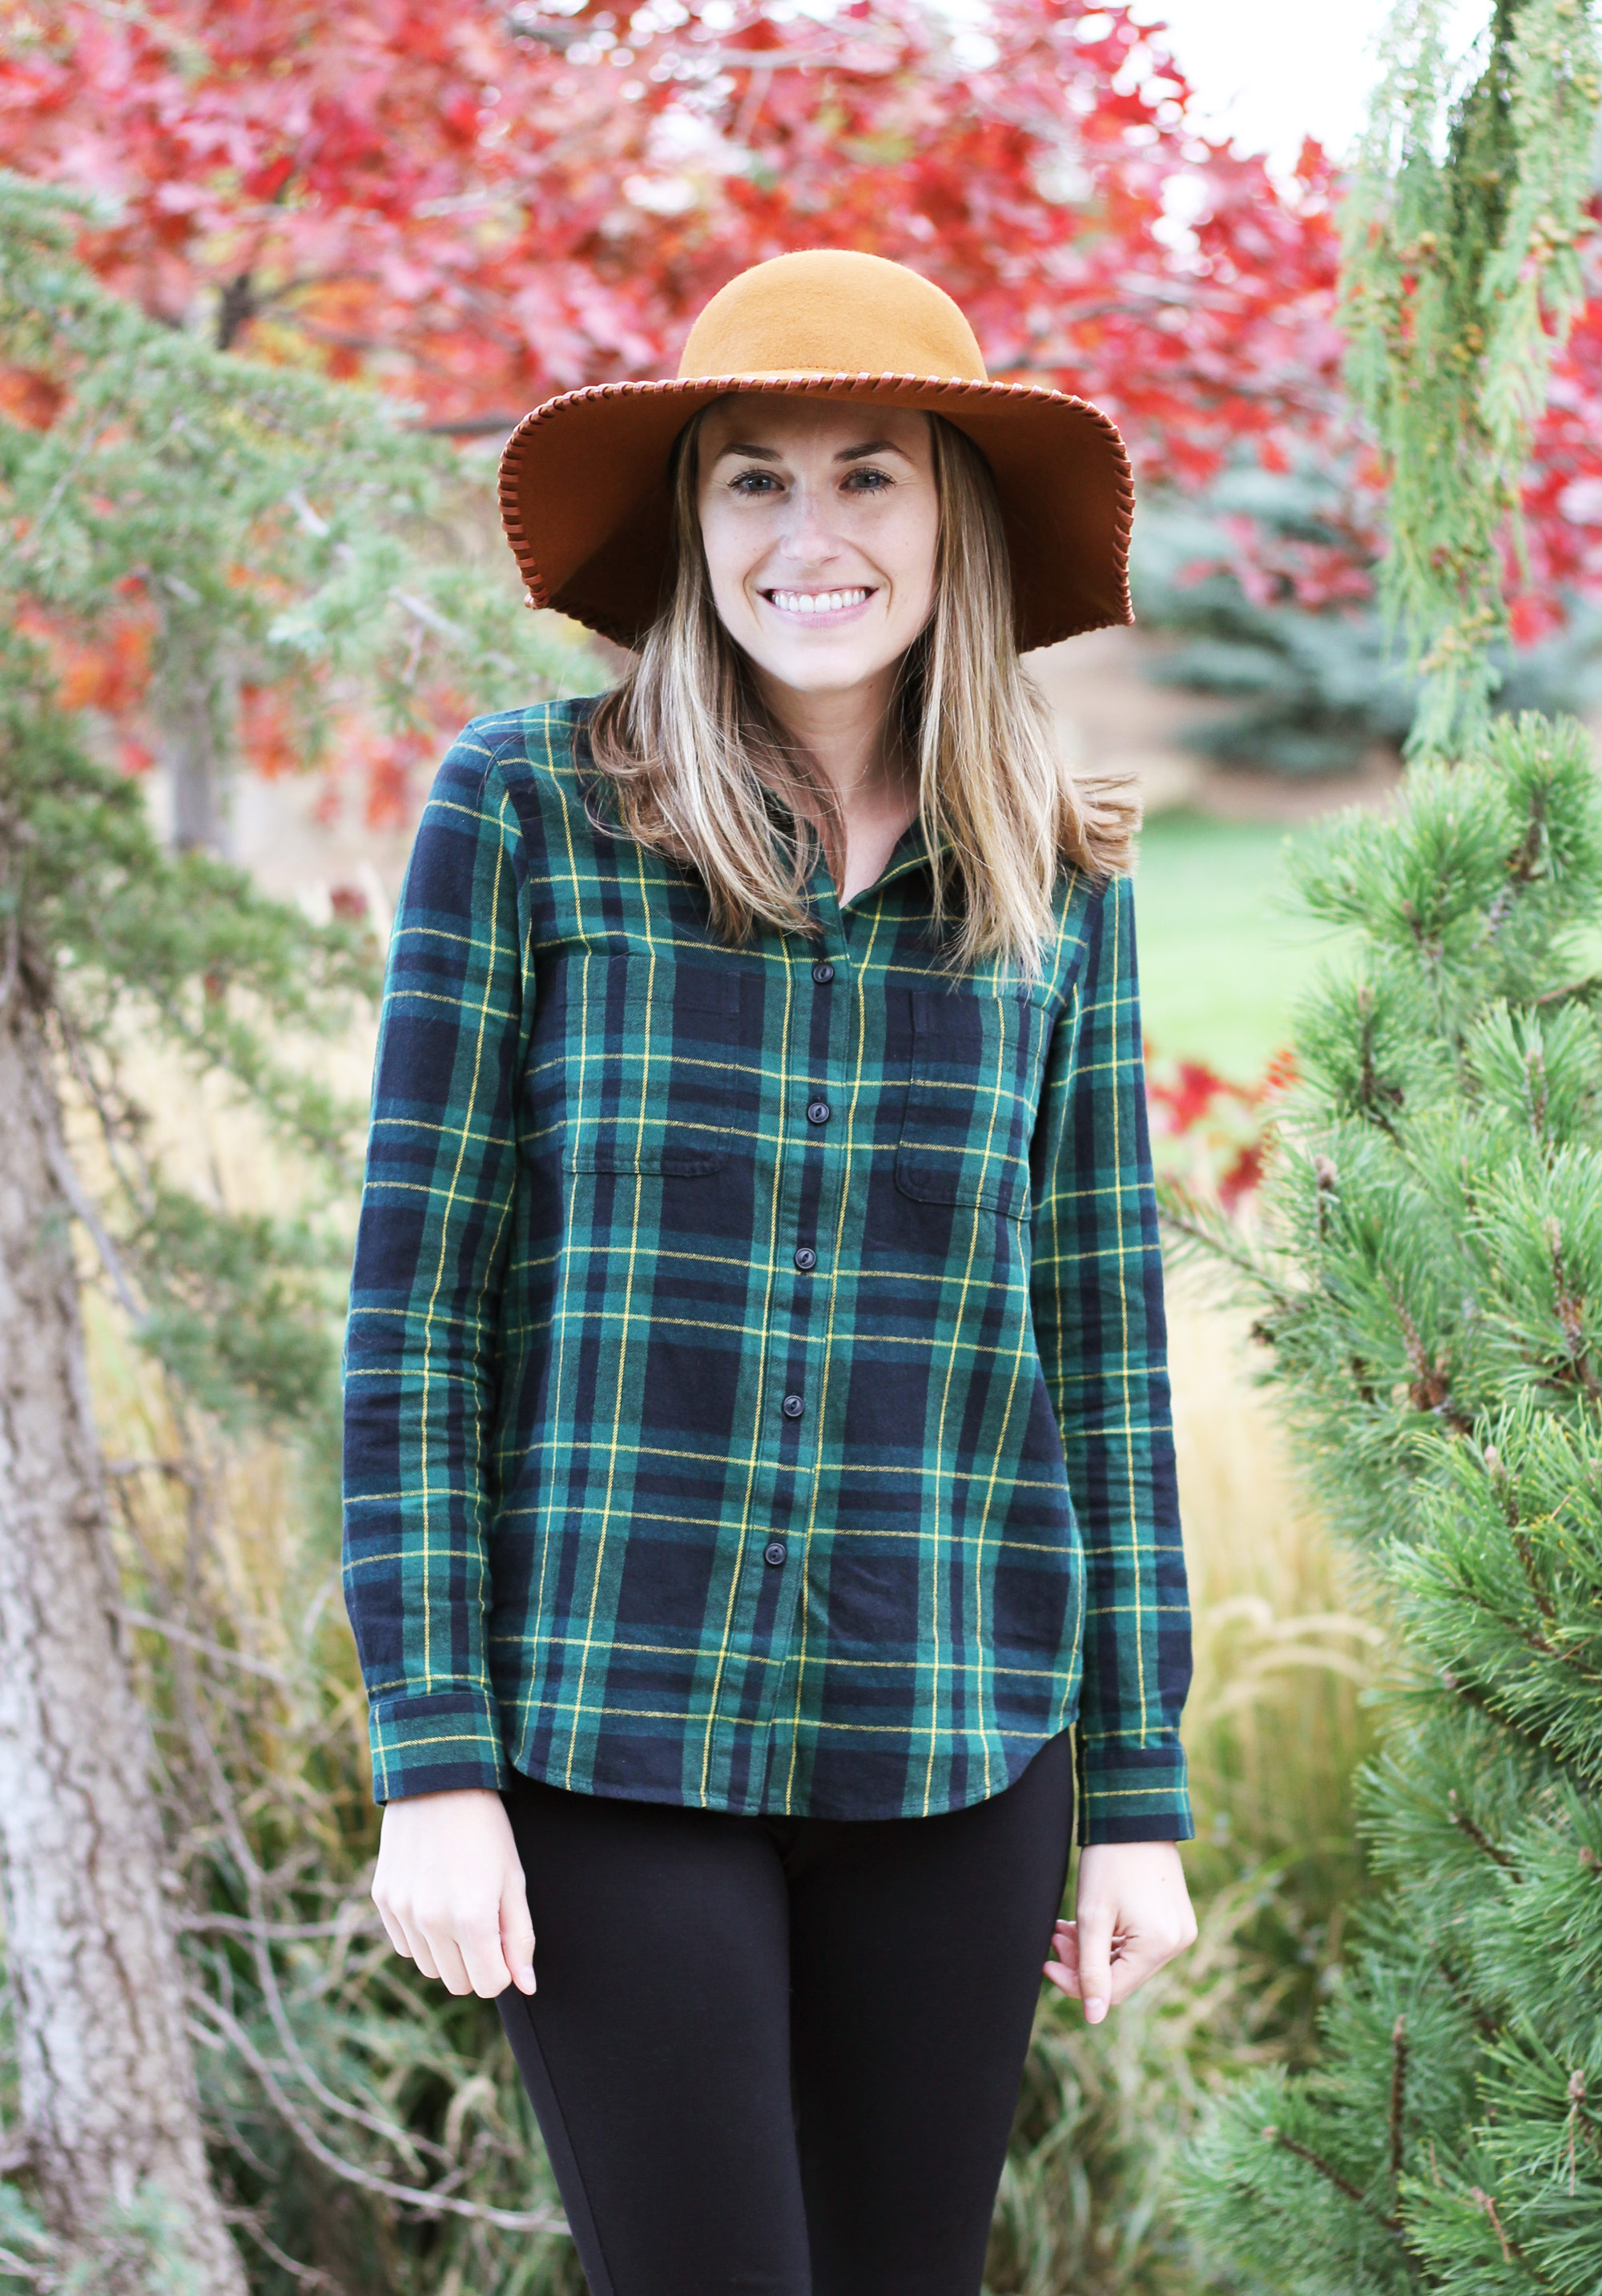 Nordstrom Anniversary Sale: Phase 3 floppy hat and Madewell flannel shirt in Barlow Plaid — Cotton Cashmere Cat Hair